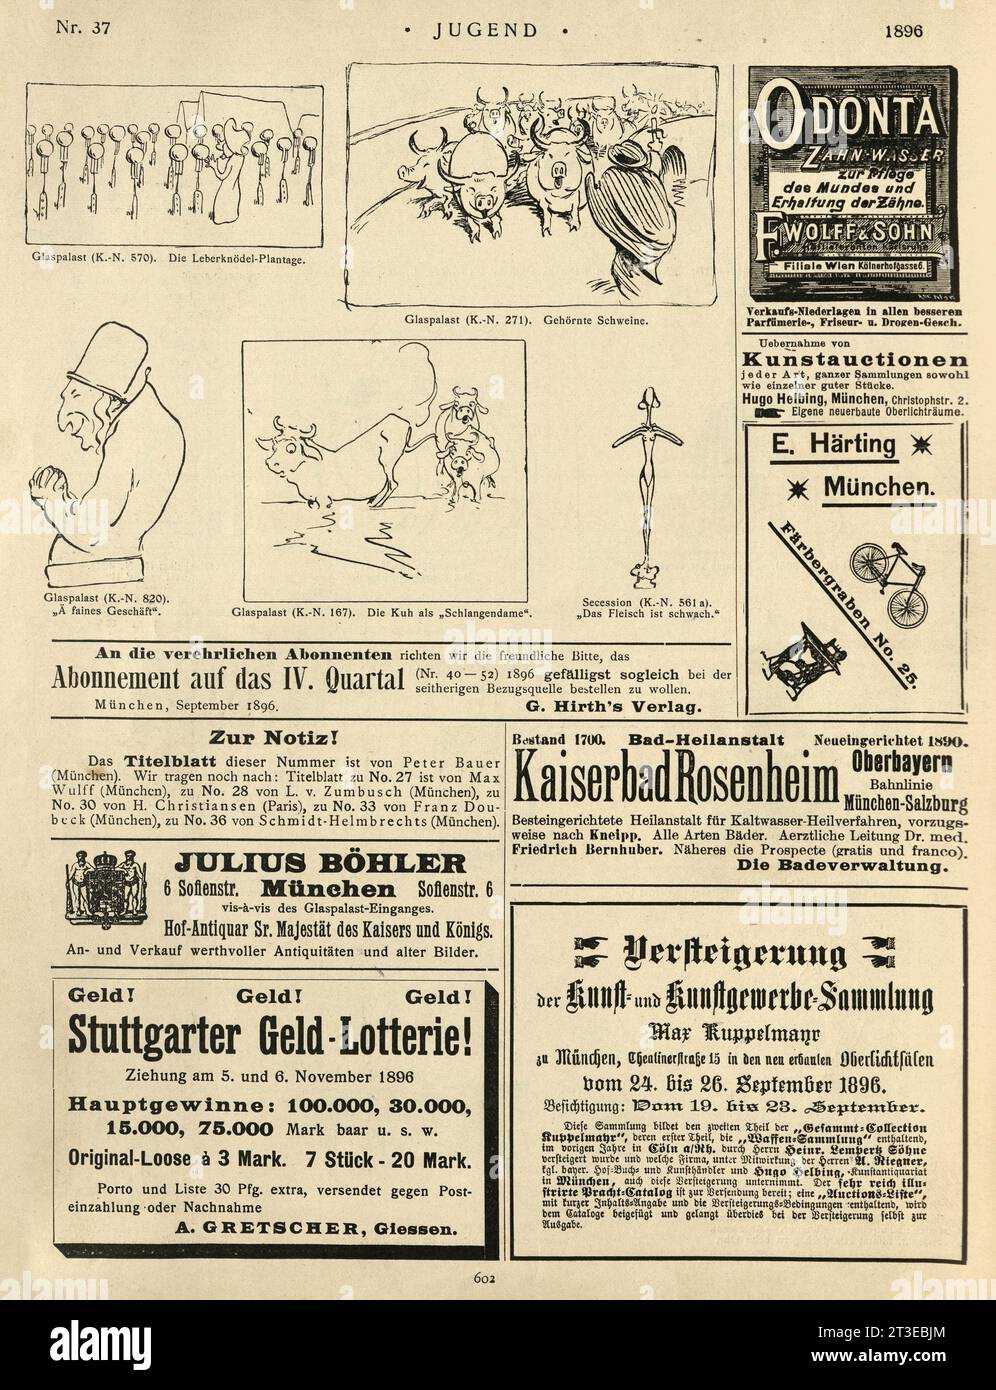 Newspaper adverts and cartoons, German 1890s, Jugend Stock Photo